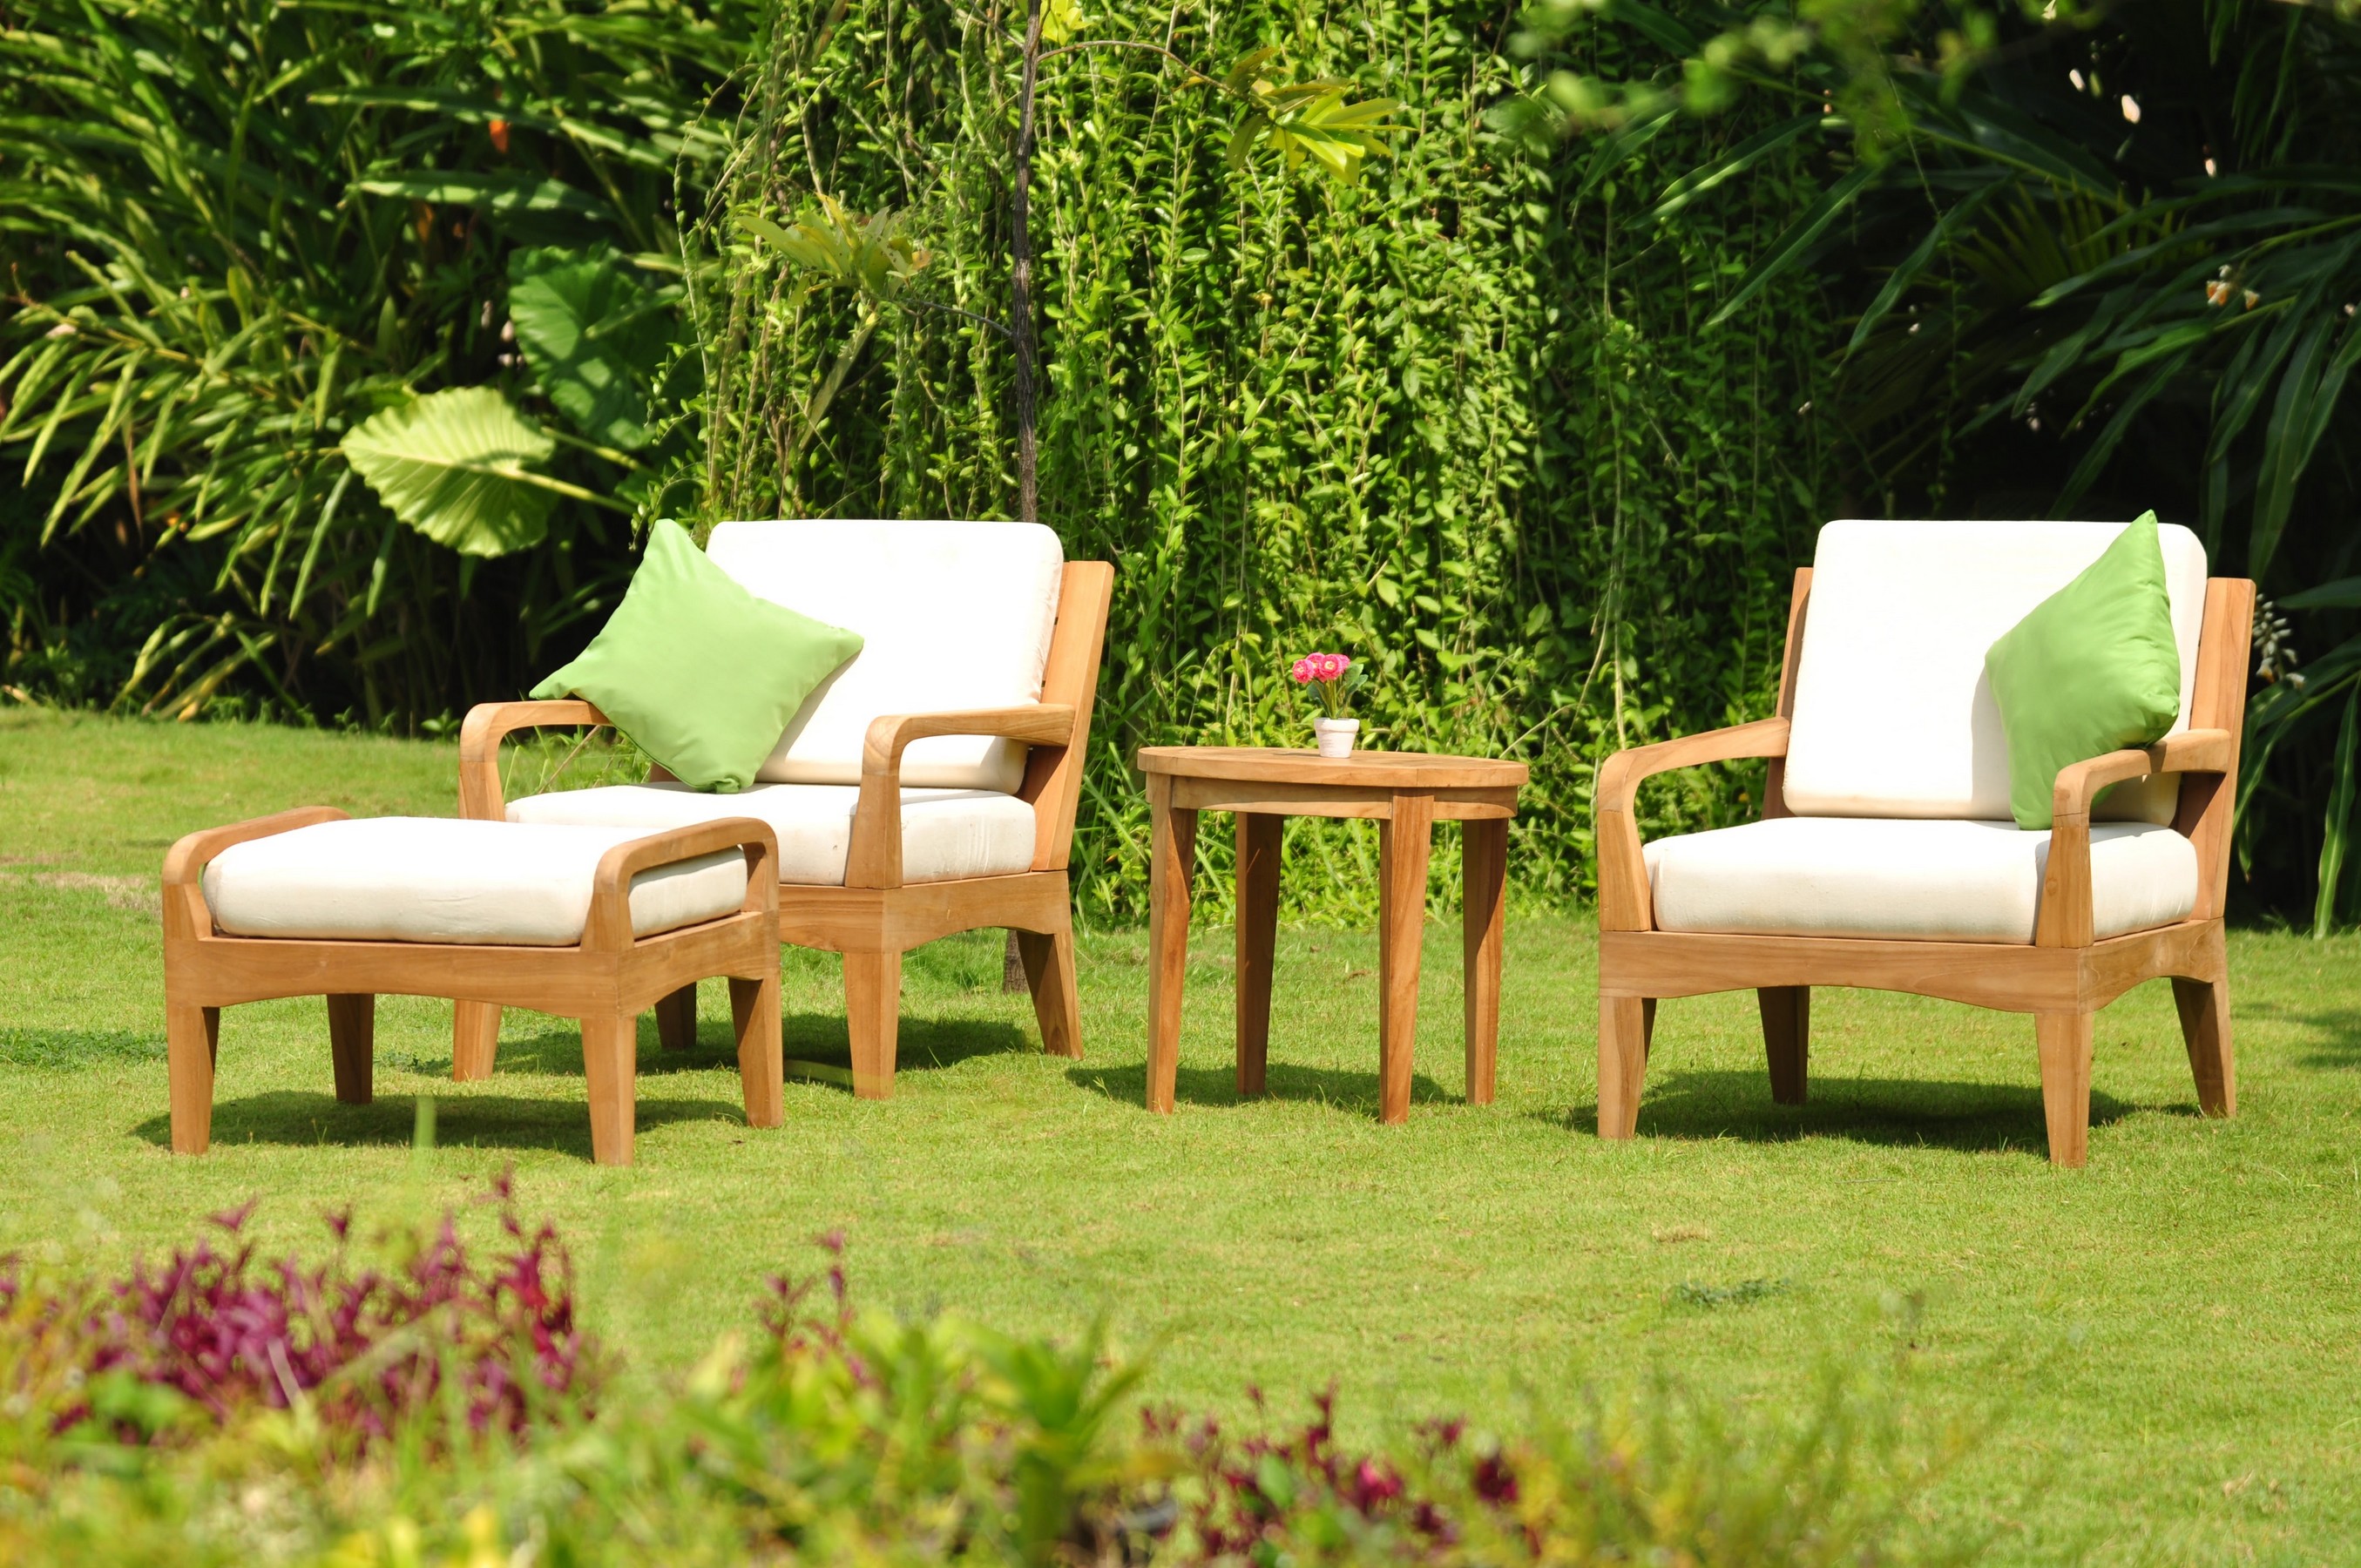 WholesaleTeak Outdoor Patio Grade-A Teak Wood 4 Piece Teak Sofa Lounge Chair Set - 2 Lounge Chairs, 1 Ottoman And 1 Round End Table - Furniture only - Noida COLLECTION #WMSSNO4 - image 1 of 2